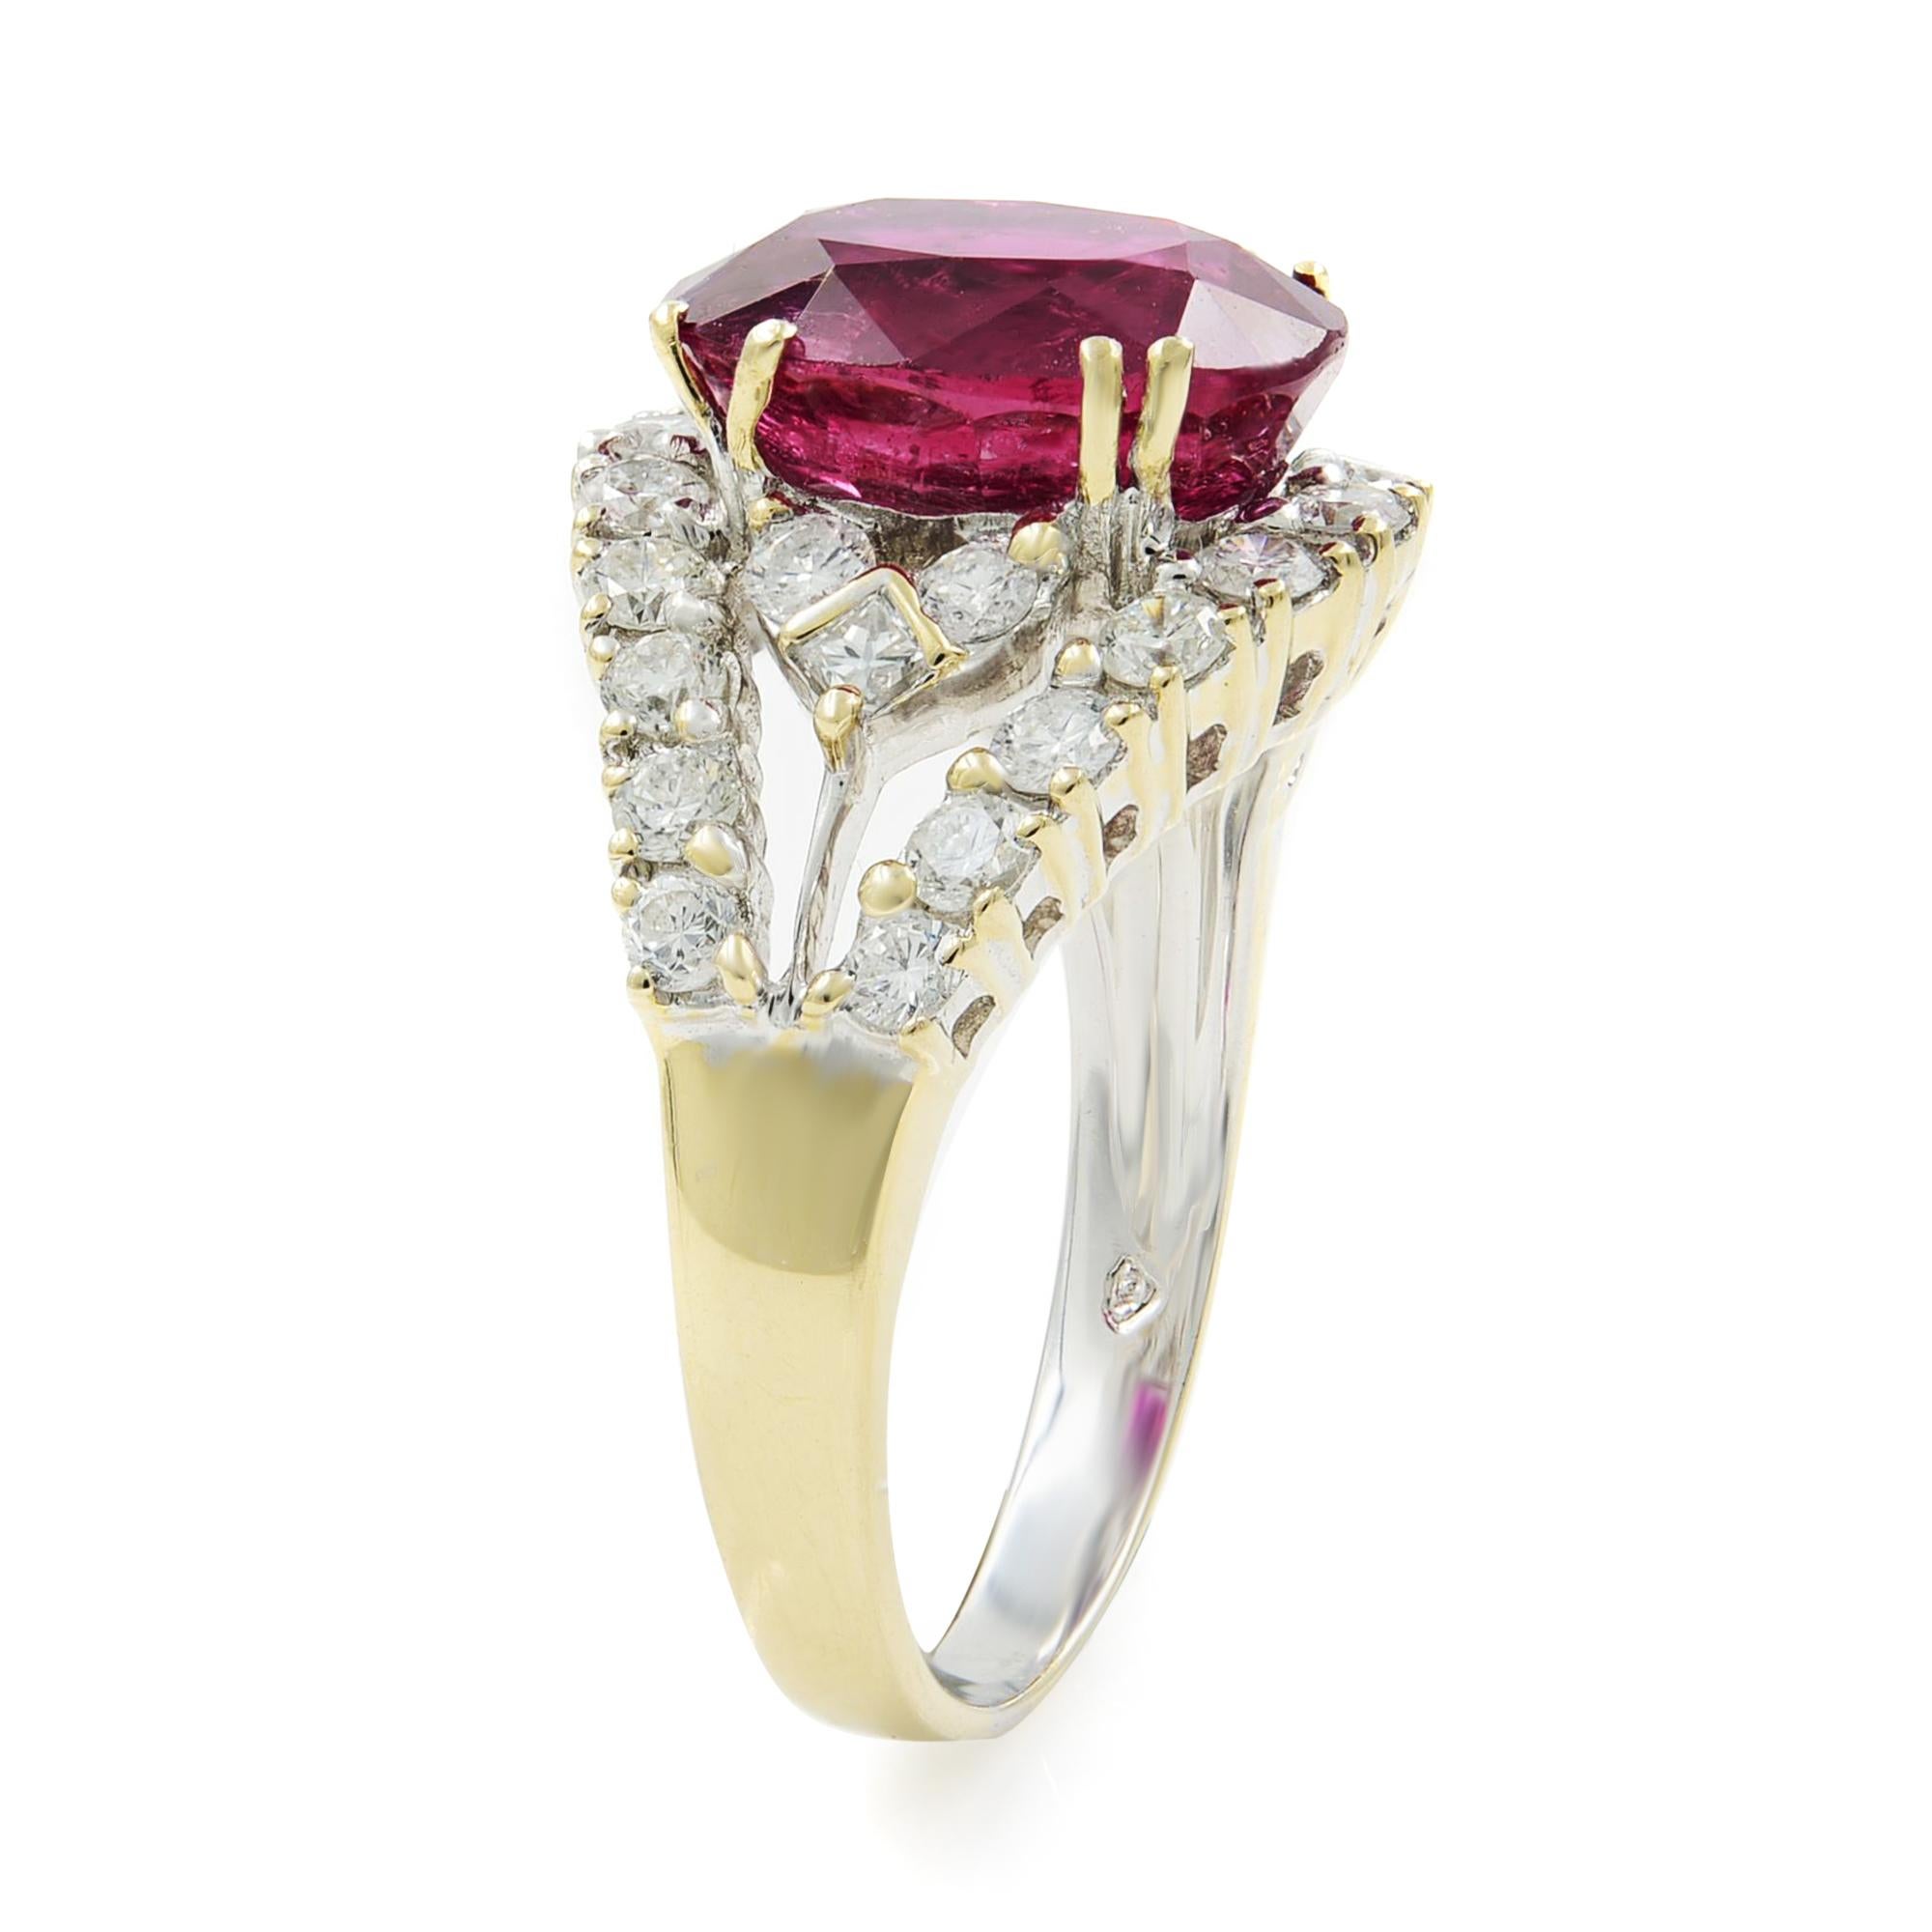 Rachel Koen Oval Ruby and Diamond Cocktail Ring 18k White Gold 6.4cttw In Excellent Condition For Sale In New York, NY